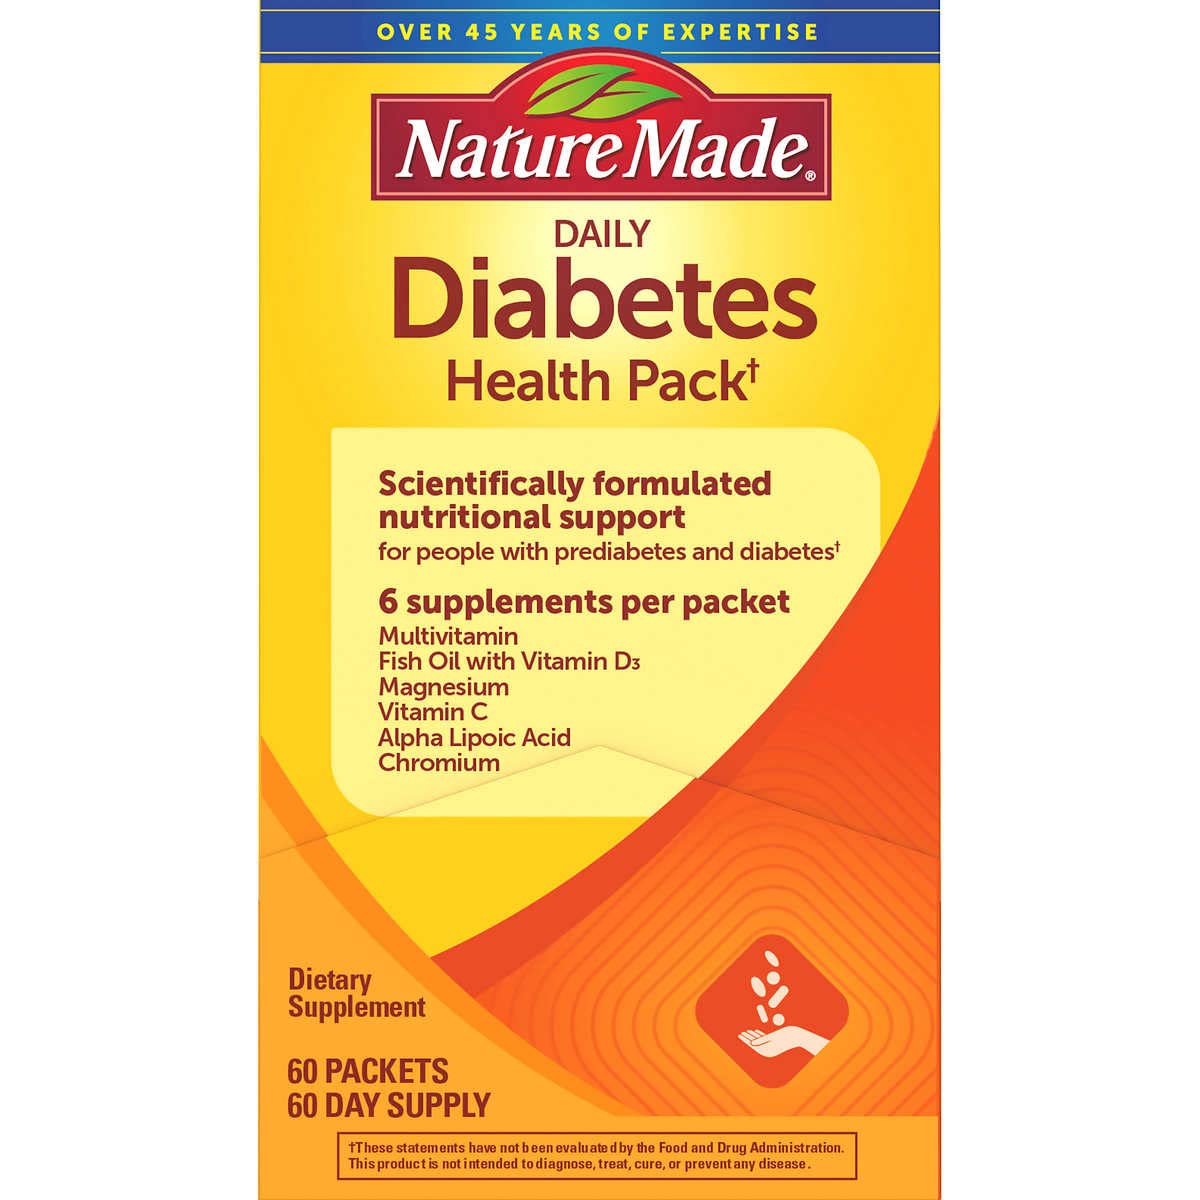 Nature Made Diabetes Health Pack 60 packets bundle with Textila Pill Organizer